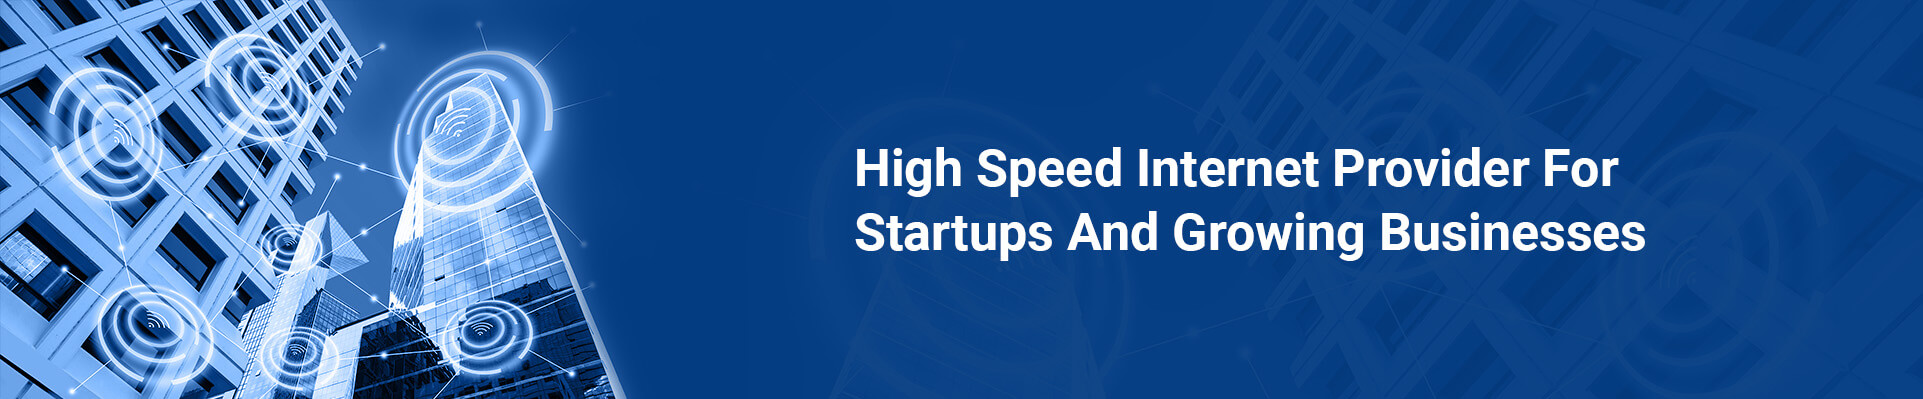 High Speed Internet Connection For Startups And Growing Businesses